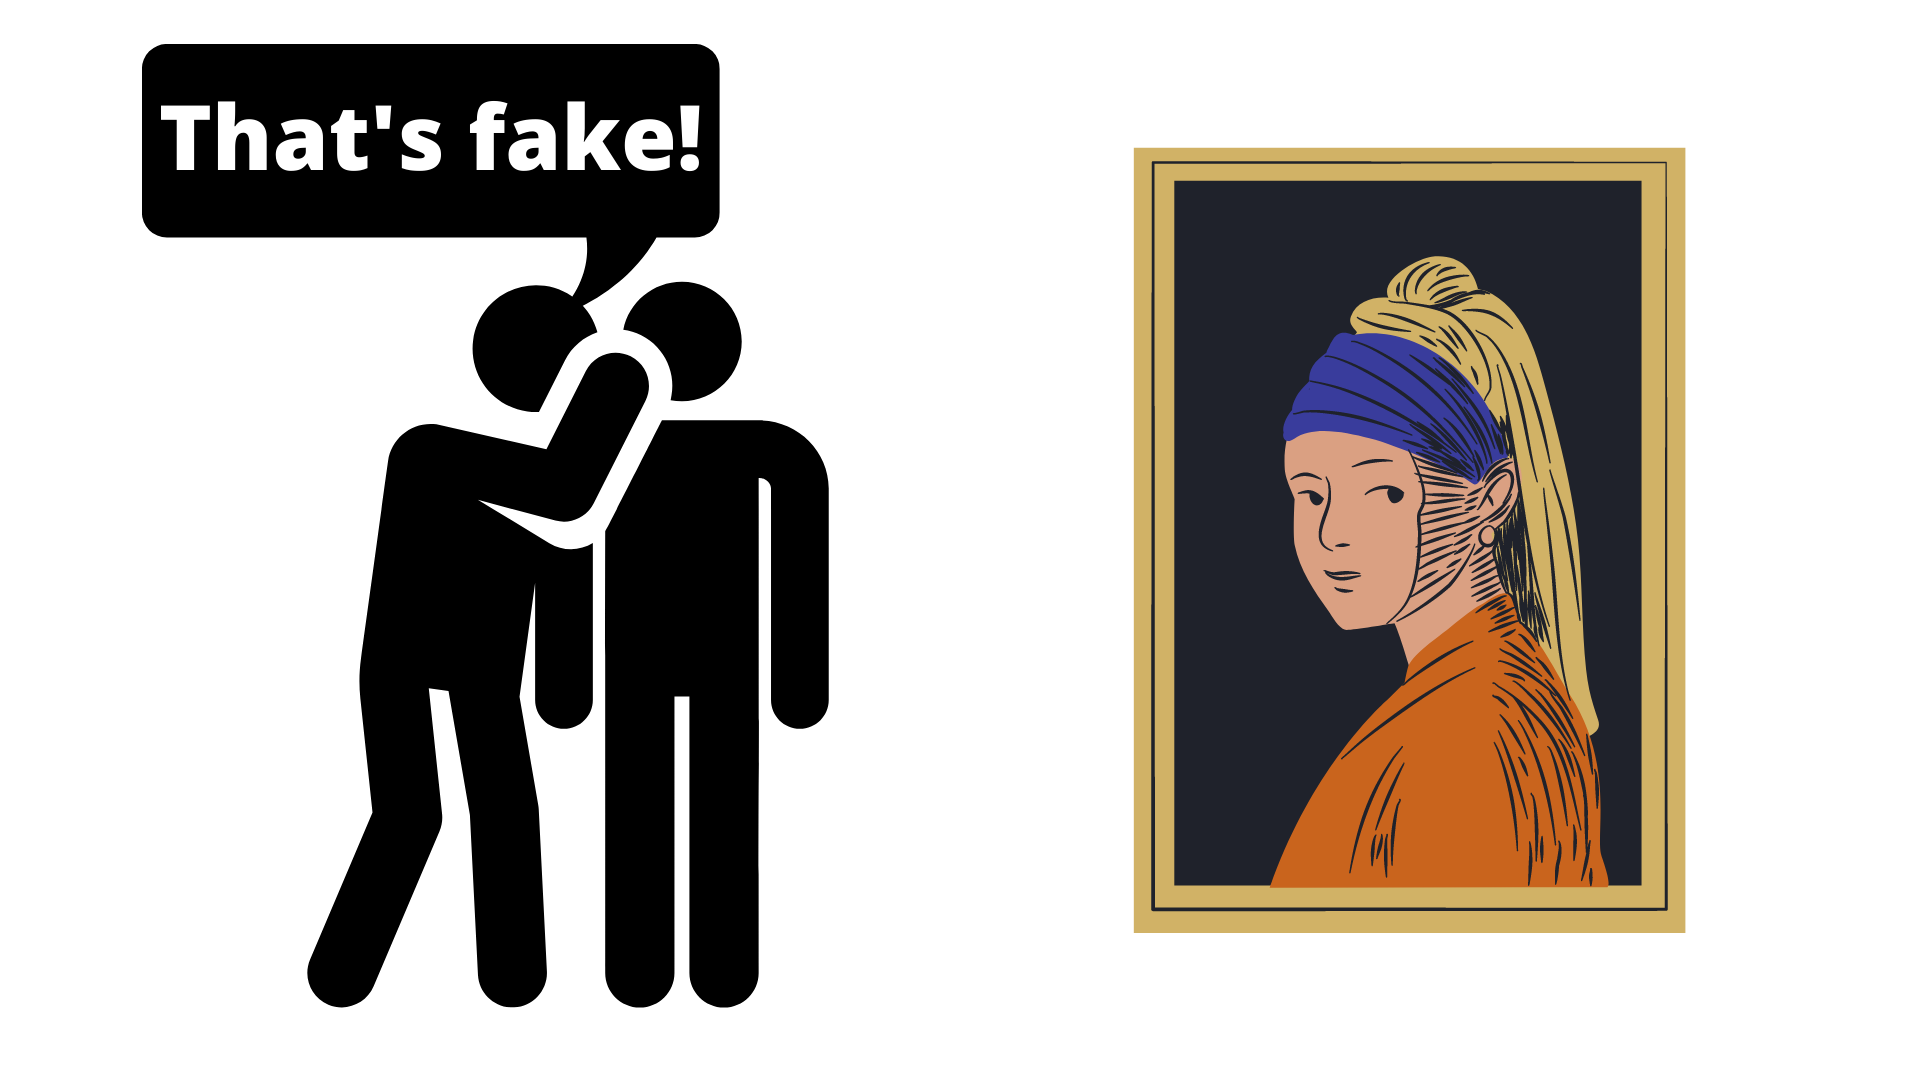 Image showing someone whispering That's fake to someone else about a painting.